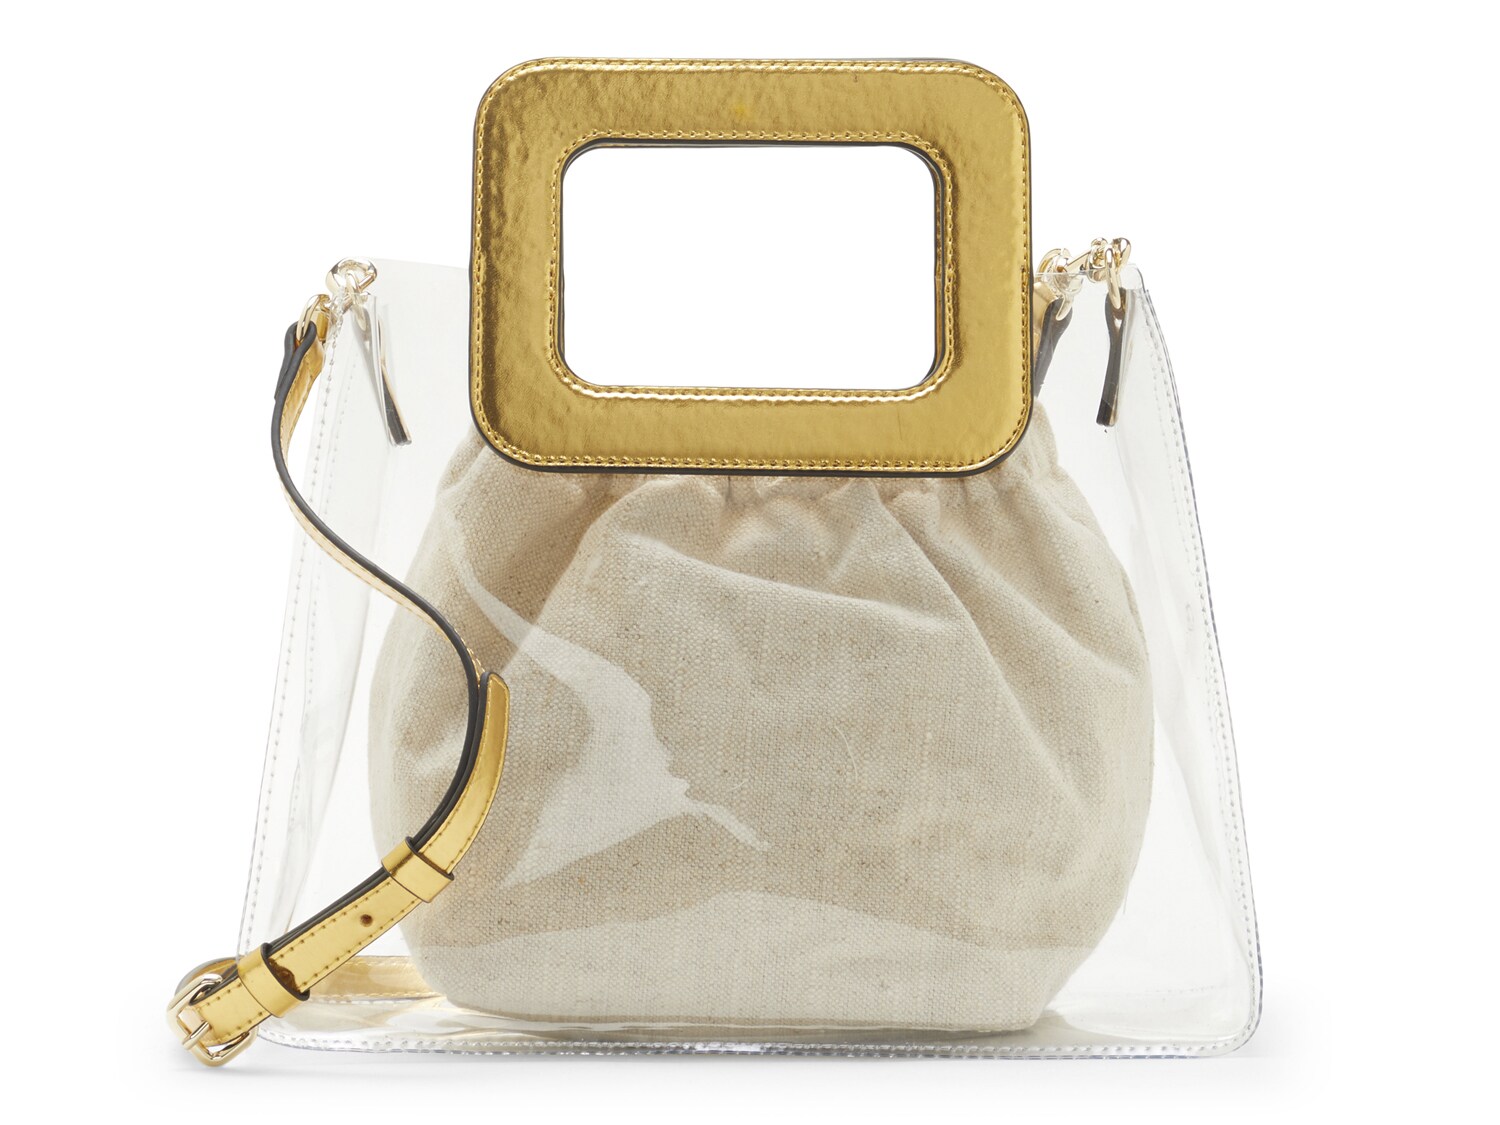 Vince Camuto Kenni Satchel - Free Shipping | DSW